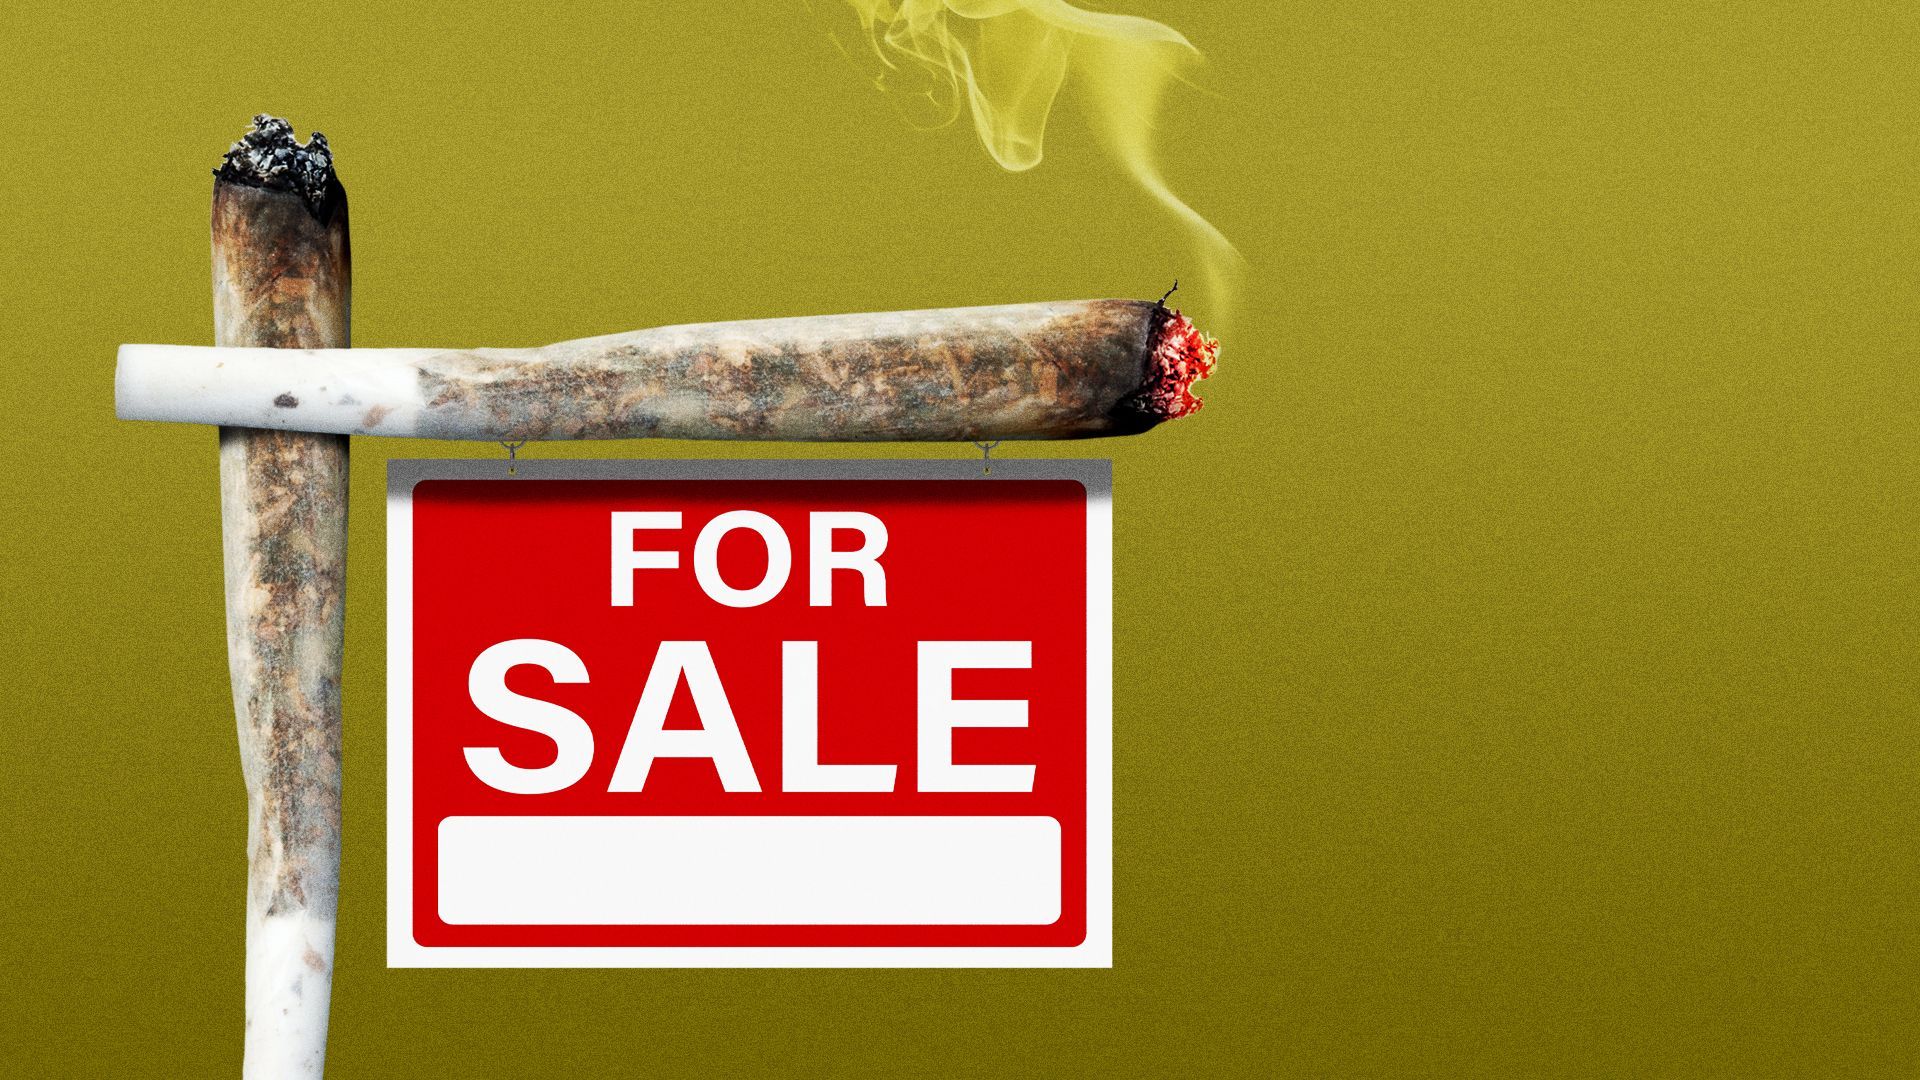 Illustration of a "for sale" sign post made out of two marijuana joints. 